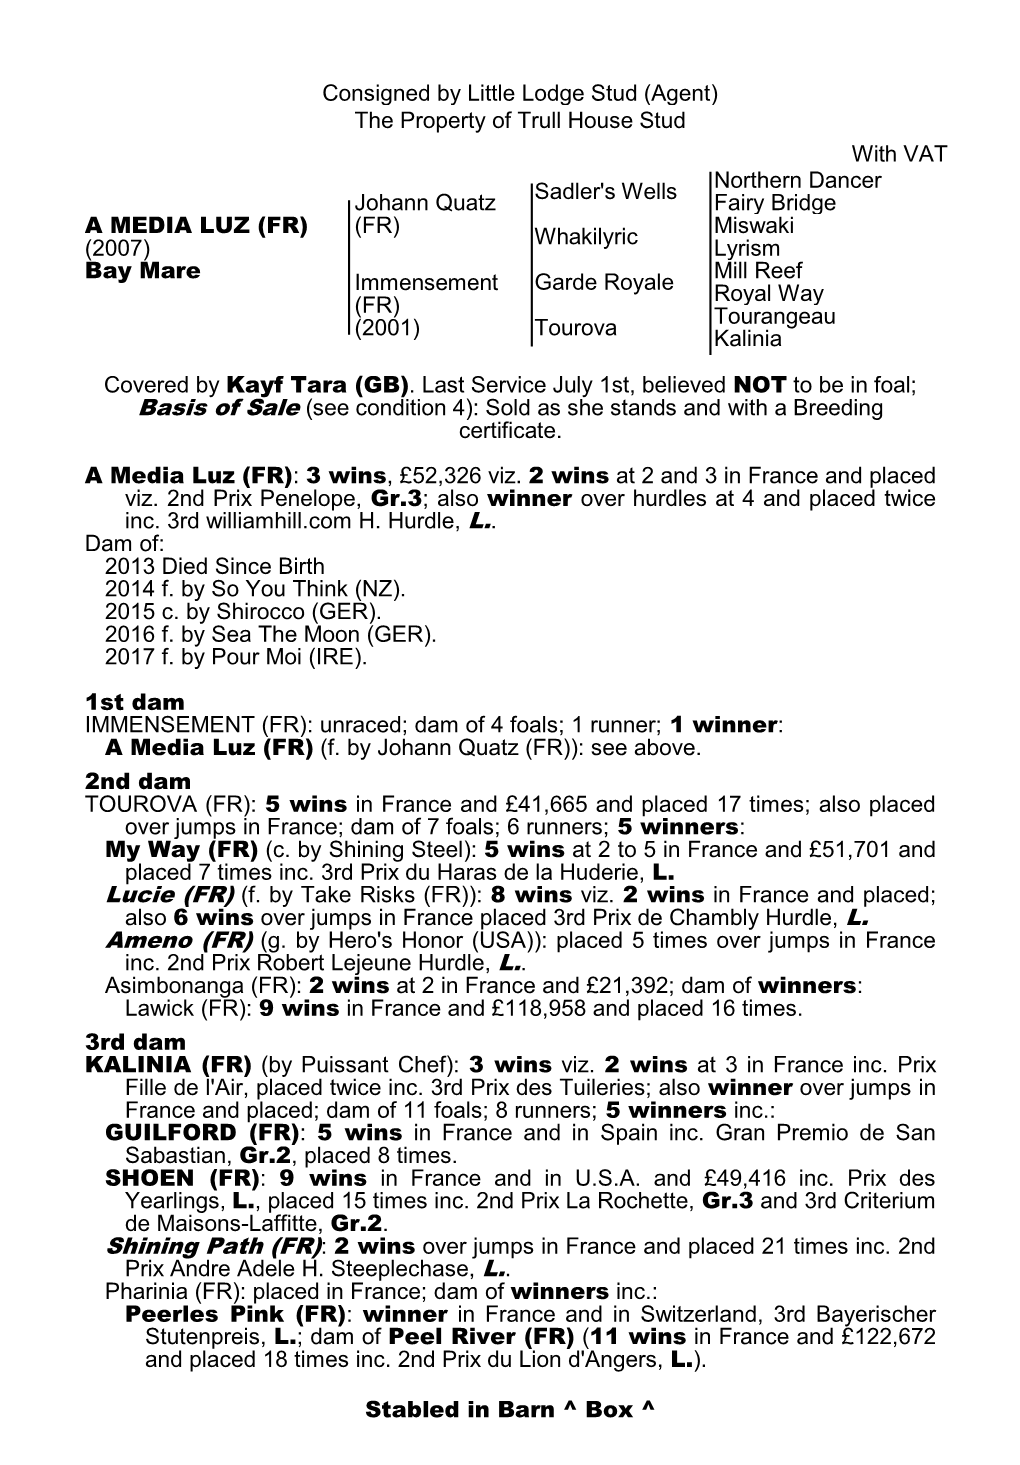 Consigned by Little Lodge Stud (Agent) the Property Of